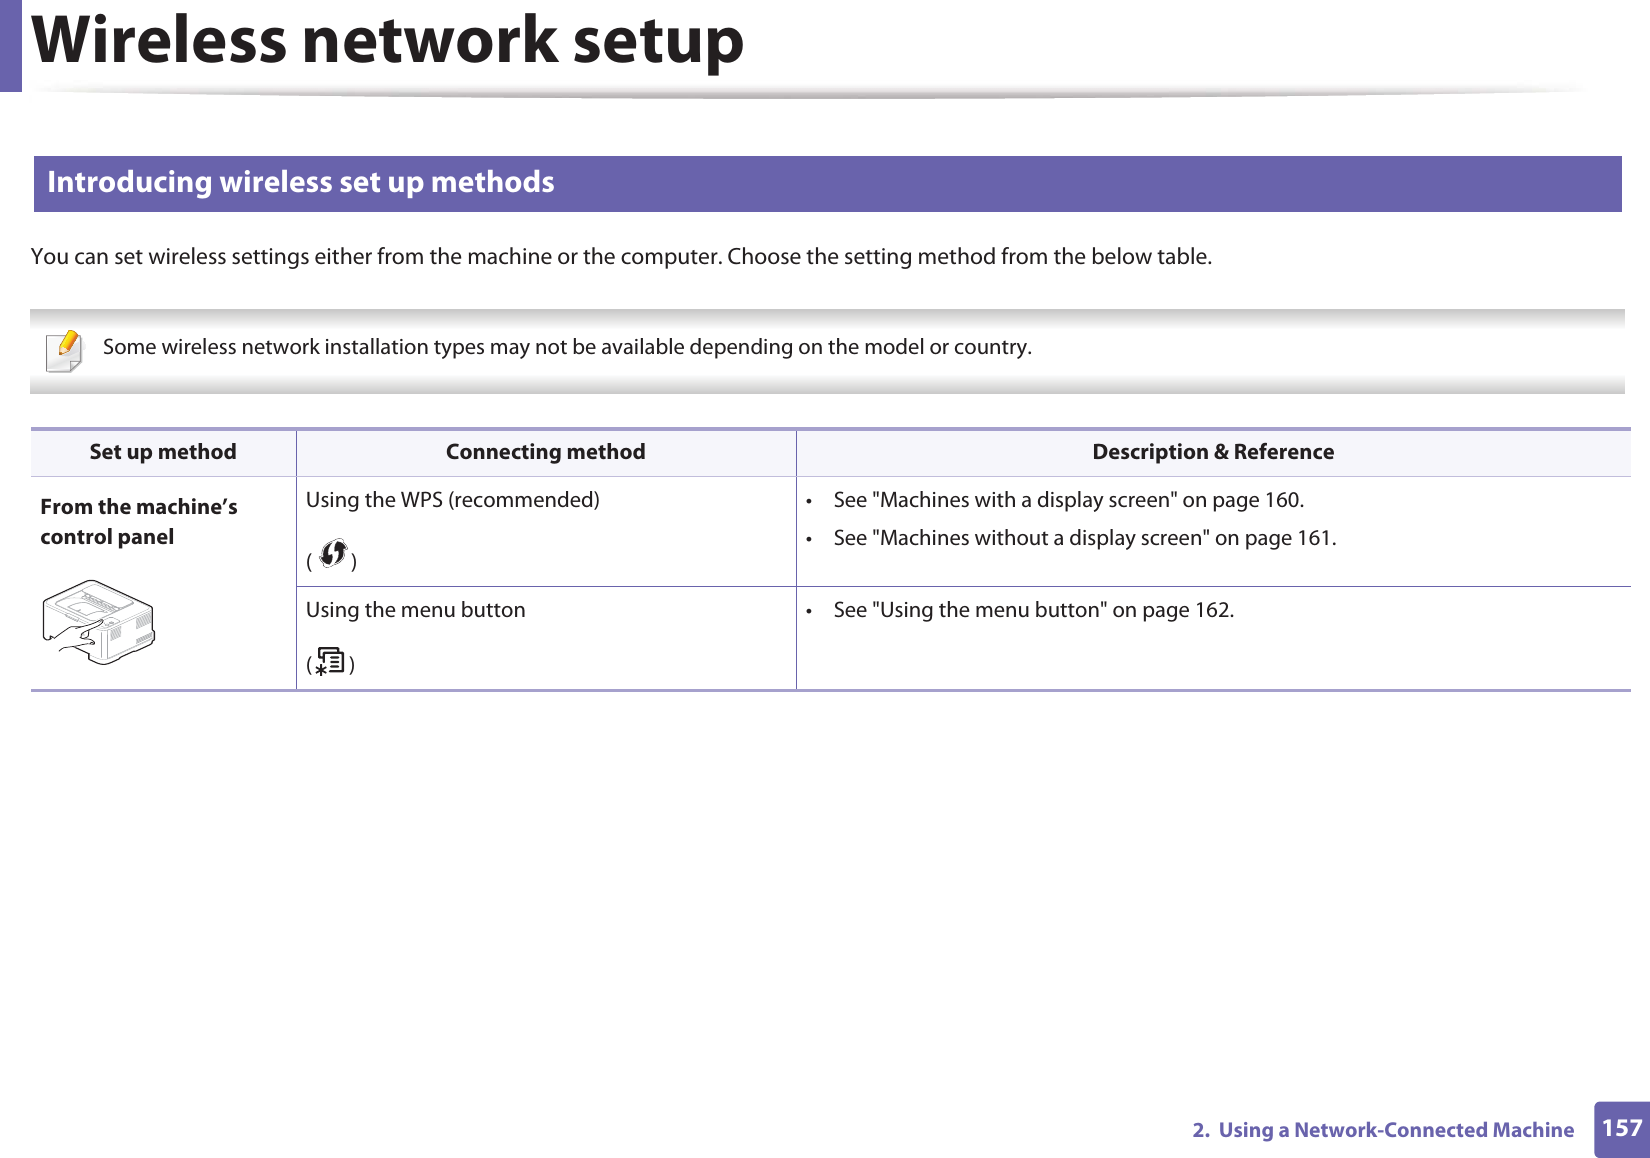 Wireless network setup1572.  Using a Network-Connected Machine13 Introducing wireless set up methodsYou can set wireless settings either from the machine or the computer. Choose the setting method from the below table. Some wireless network installation types may not be available depending on the model or country.  Set up method Connecting method Description &amp; ReferenceFrom the machine’s control panelUsing the WPS (recommended)()• See &quot;Machines with a display screen&quot; on page 160.• See &quot;Machines without a display screen&quot; on page 161.Using the menu button()• See &quot;Using the menu button&quot; on page 162.